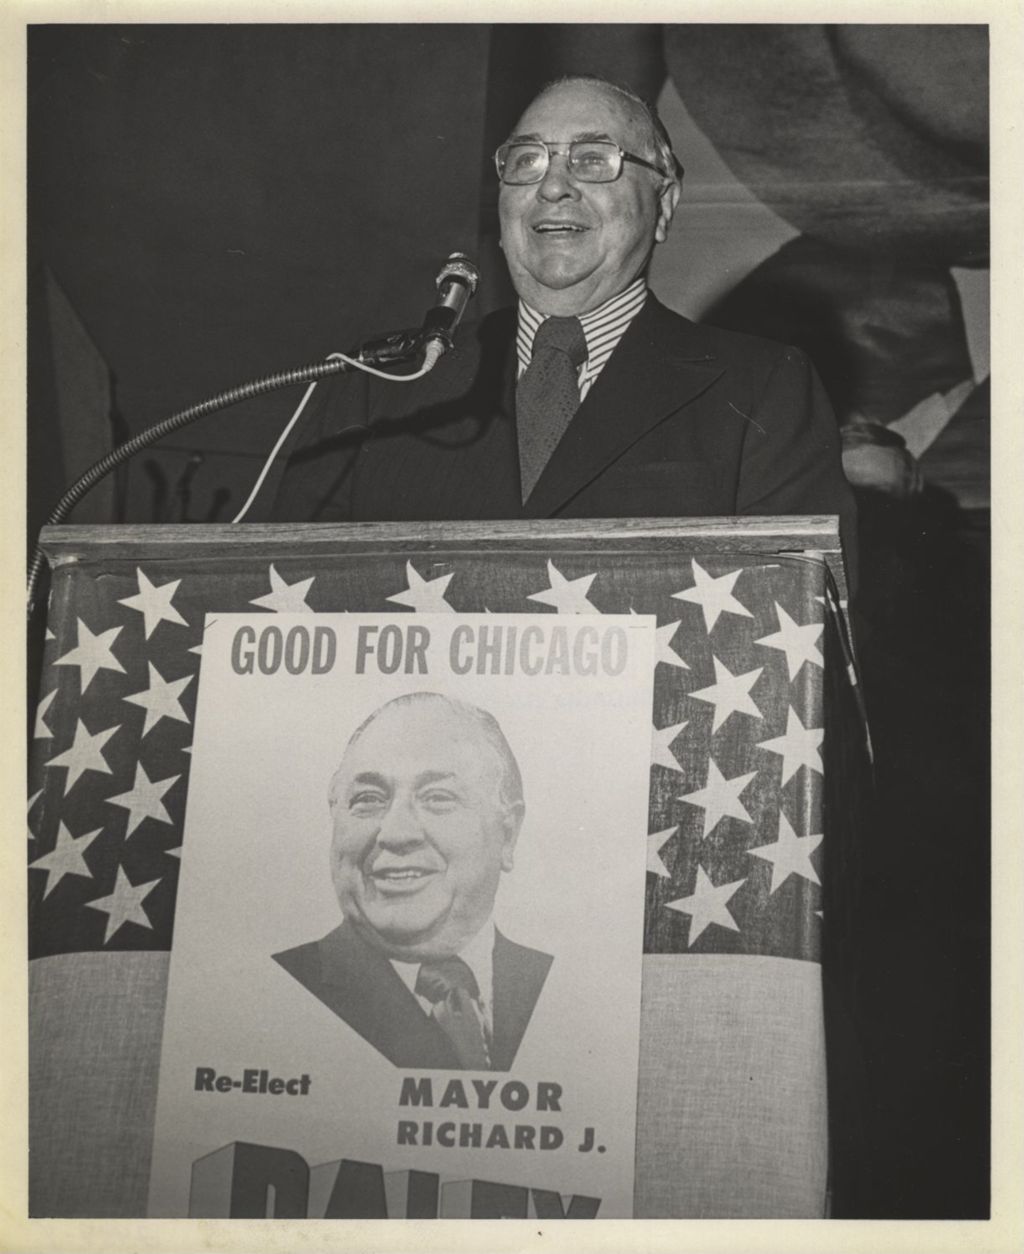 Richard J. Daley speaking at re-election rally